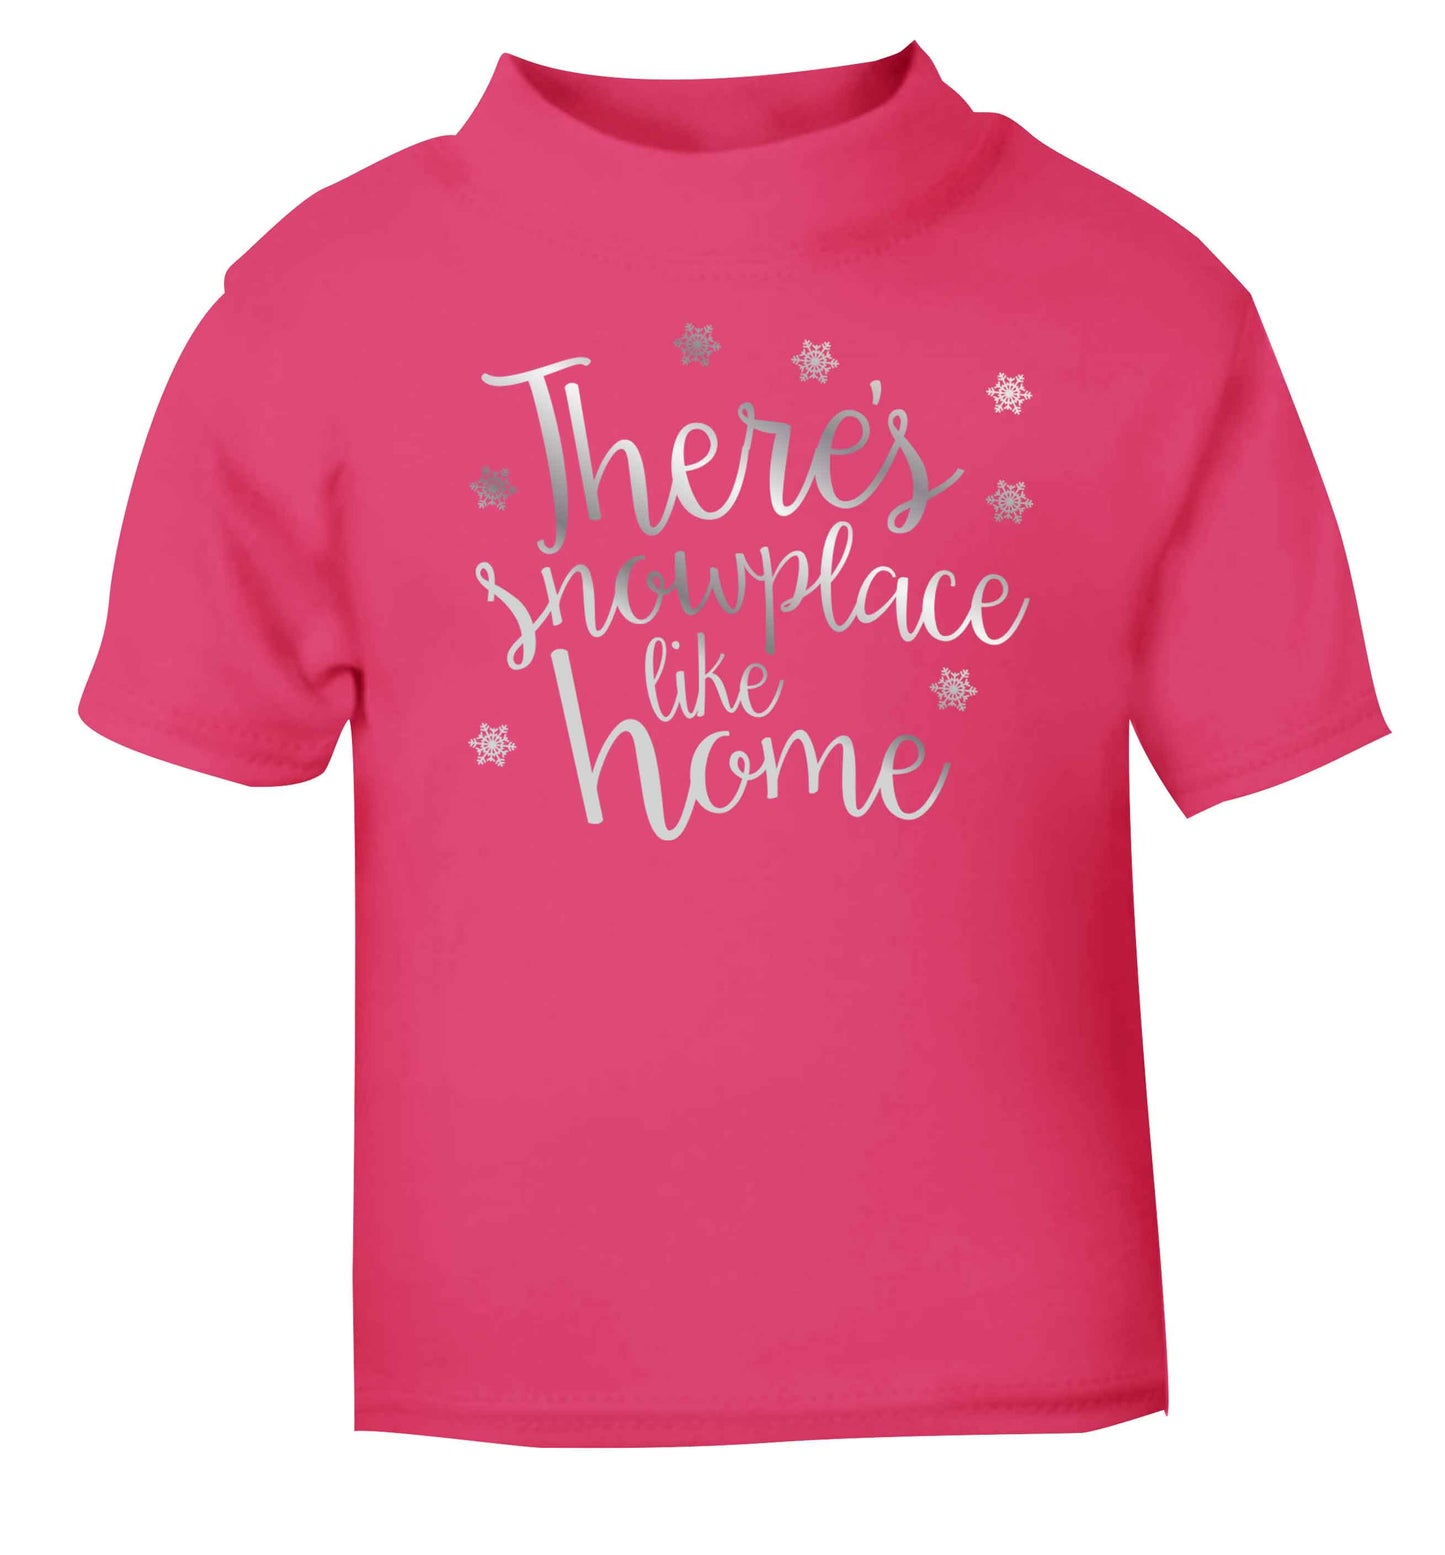 There's snowplace like home - metallic silver pink baby toddler Tshirt 2 Years